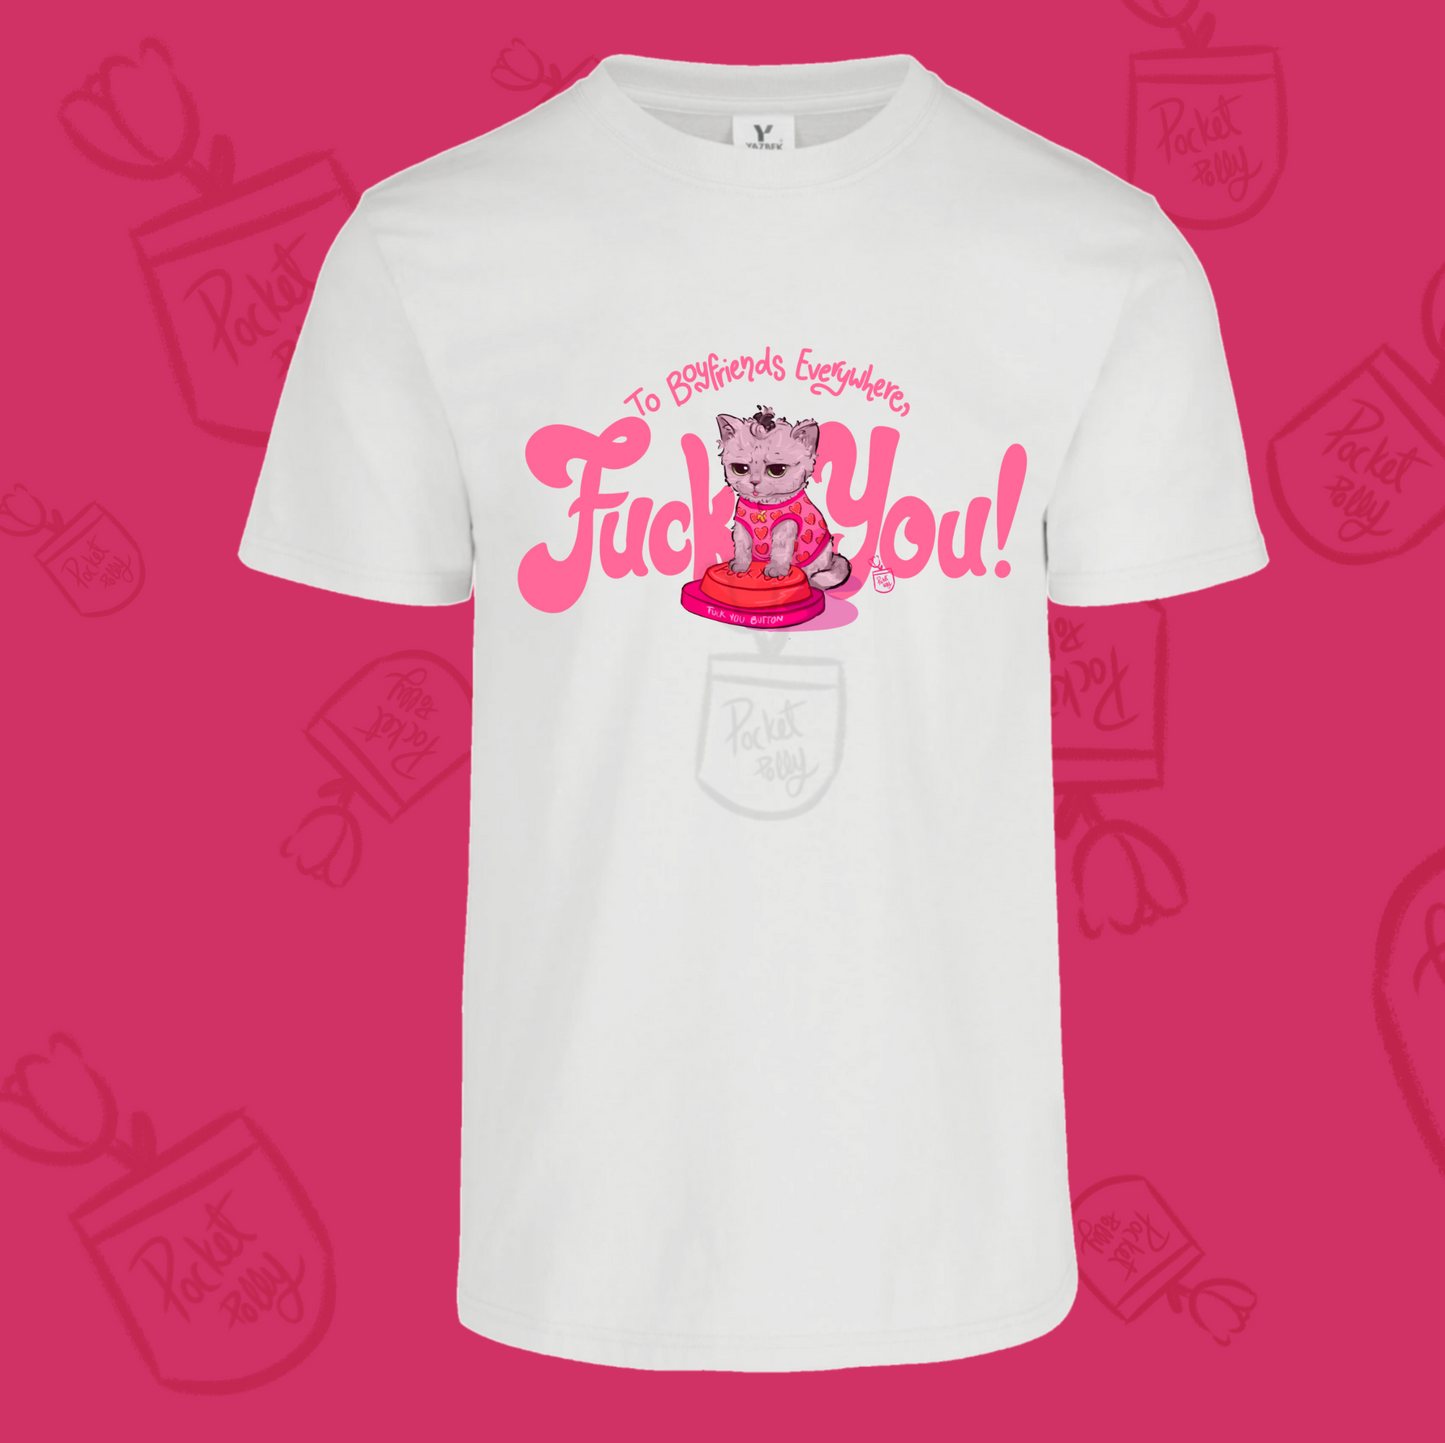 To boyfriends everywhere, Fuck your Harry Styles T-shirt